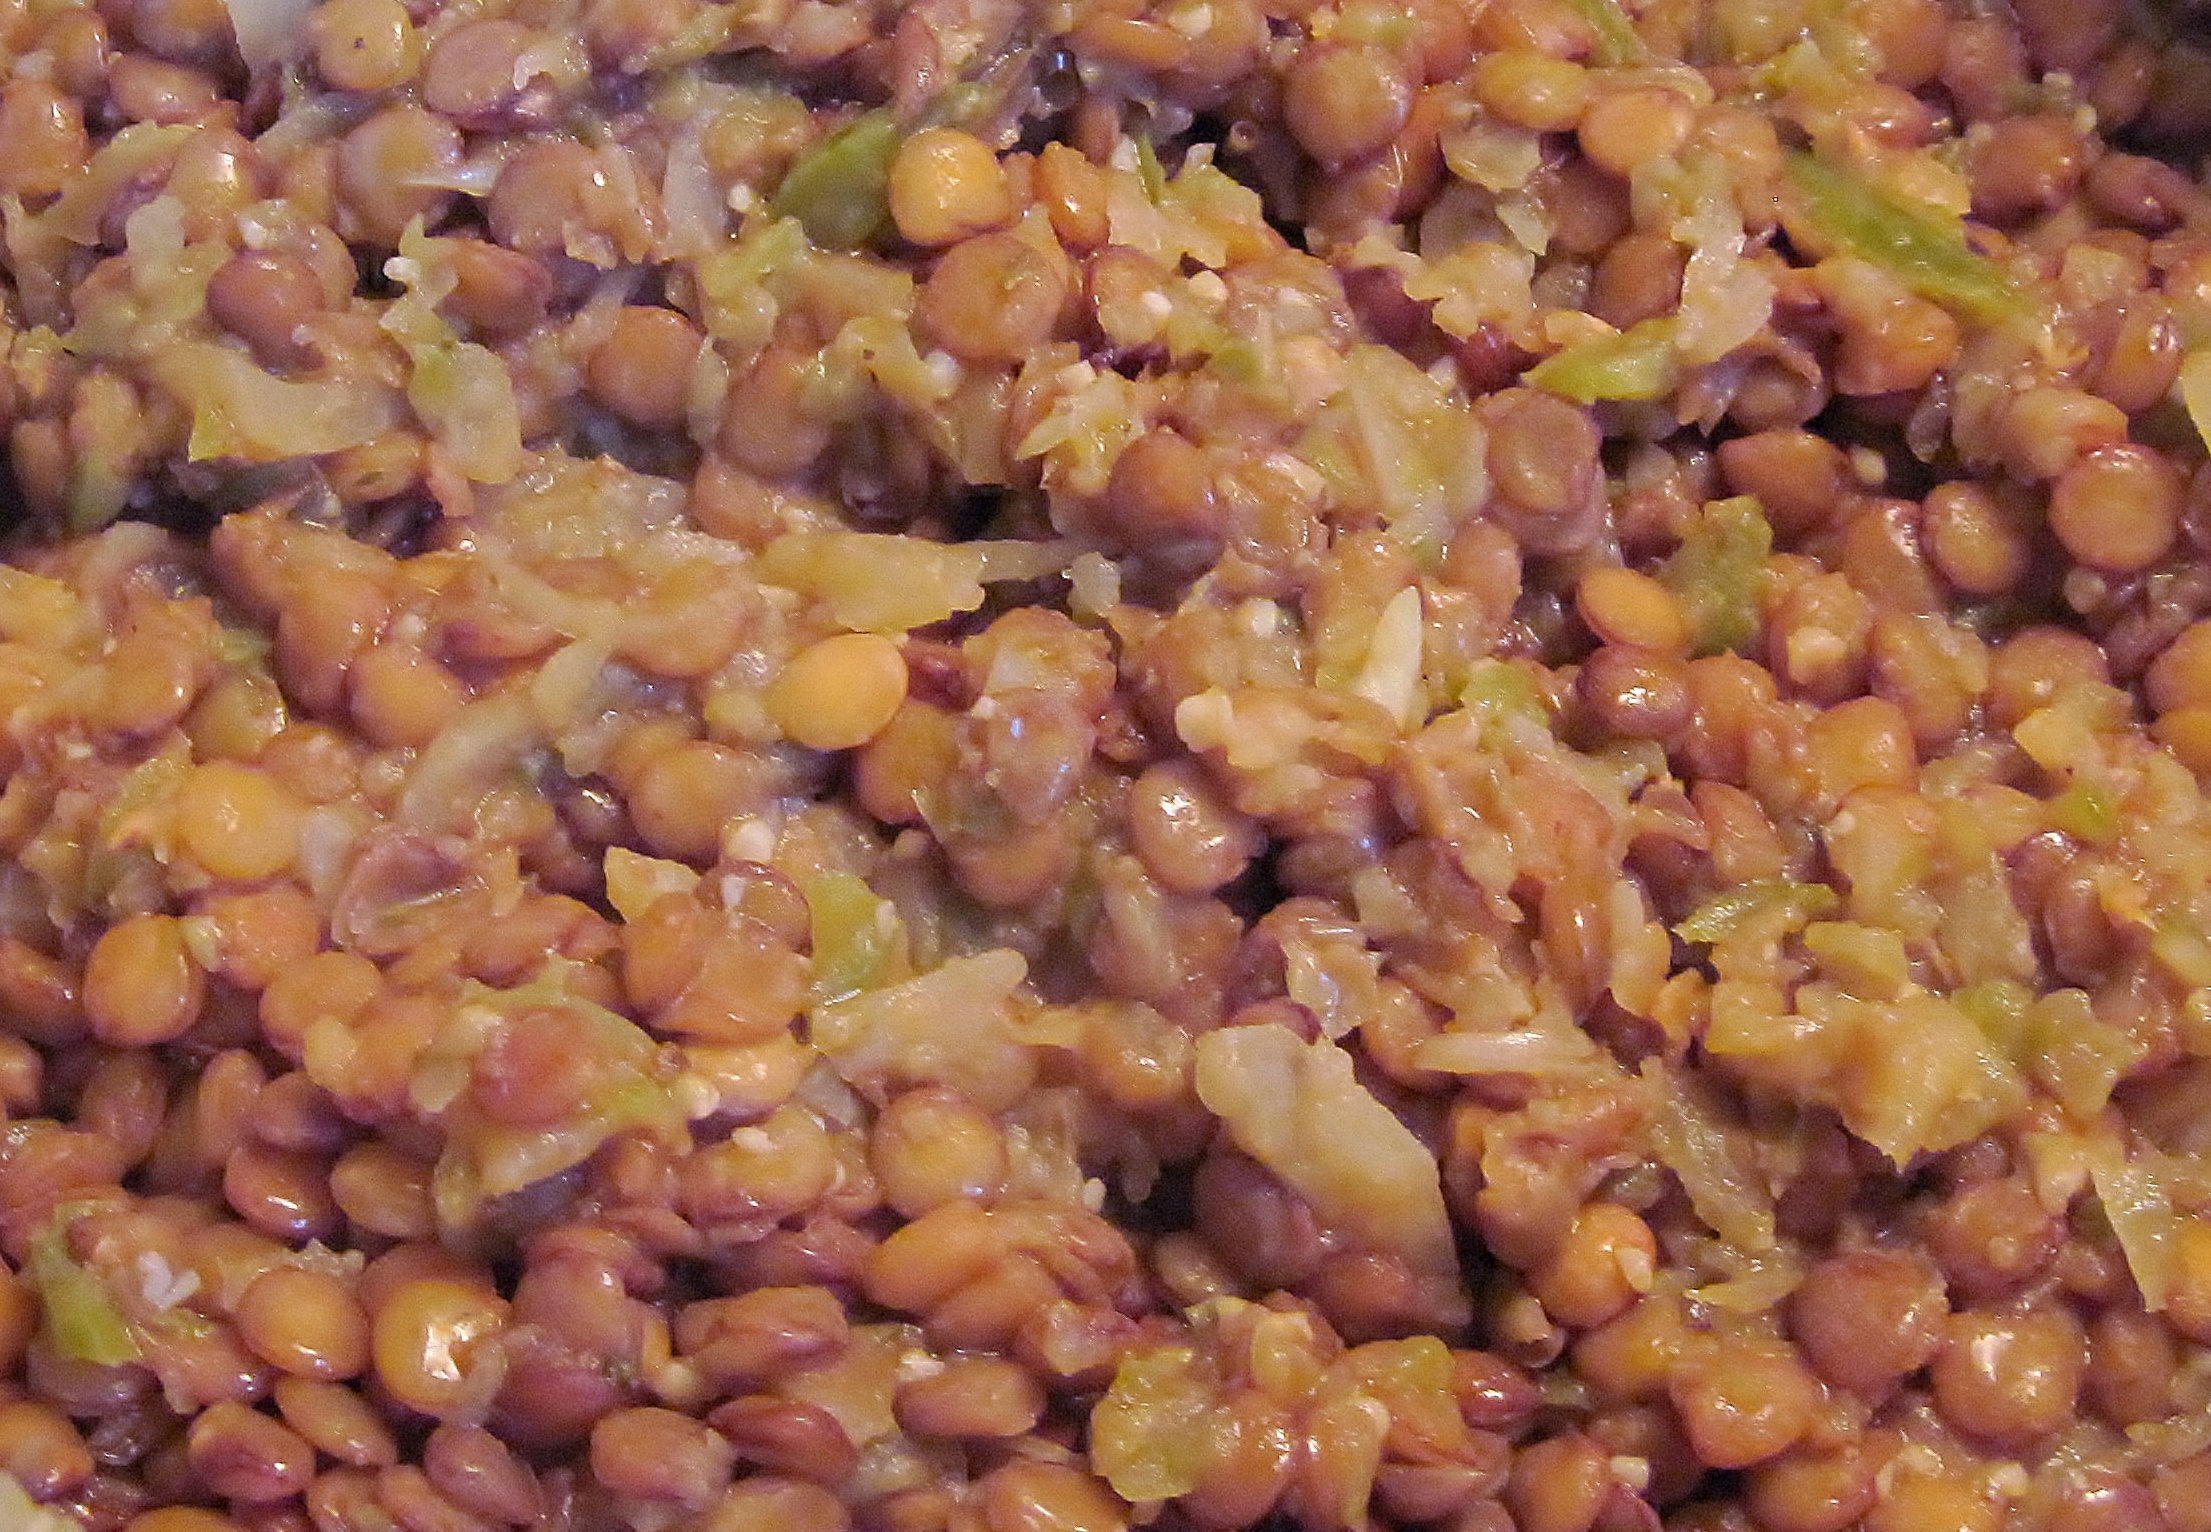 beans and broccoli are mixed together in a mixture